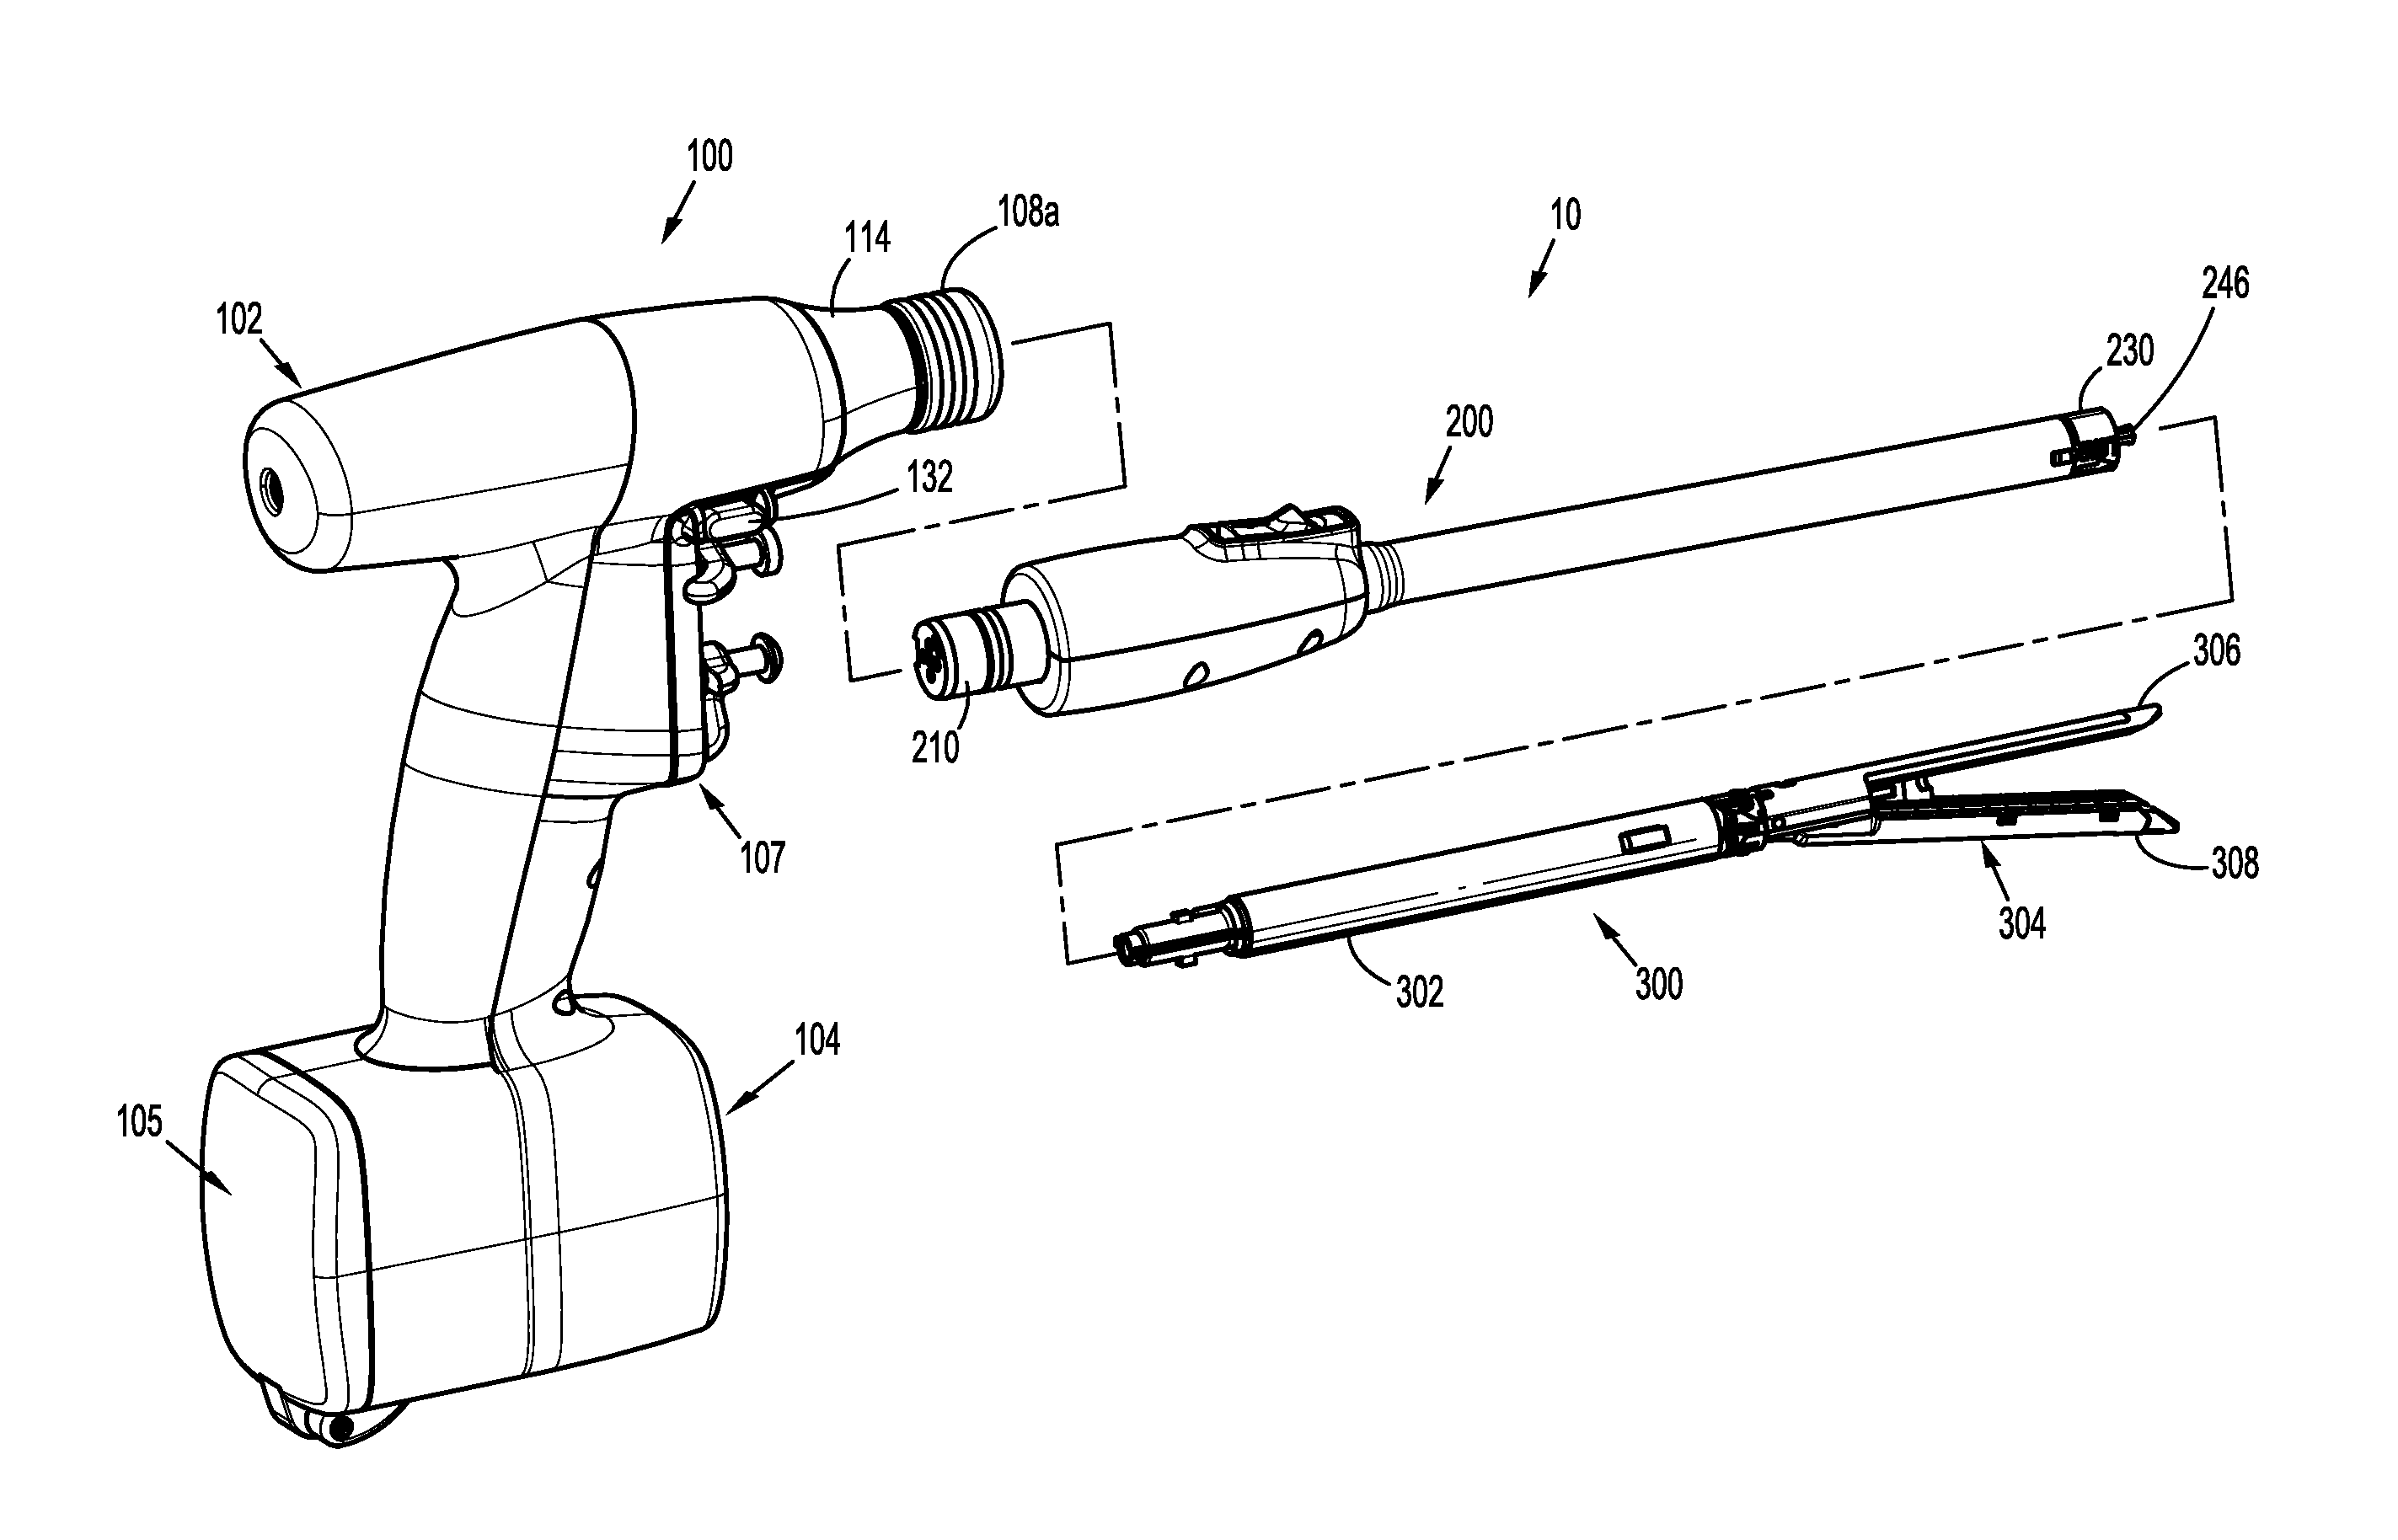 Apparatus and method for differentiating between tissue and mechanical obstruction in a surgical instrument